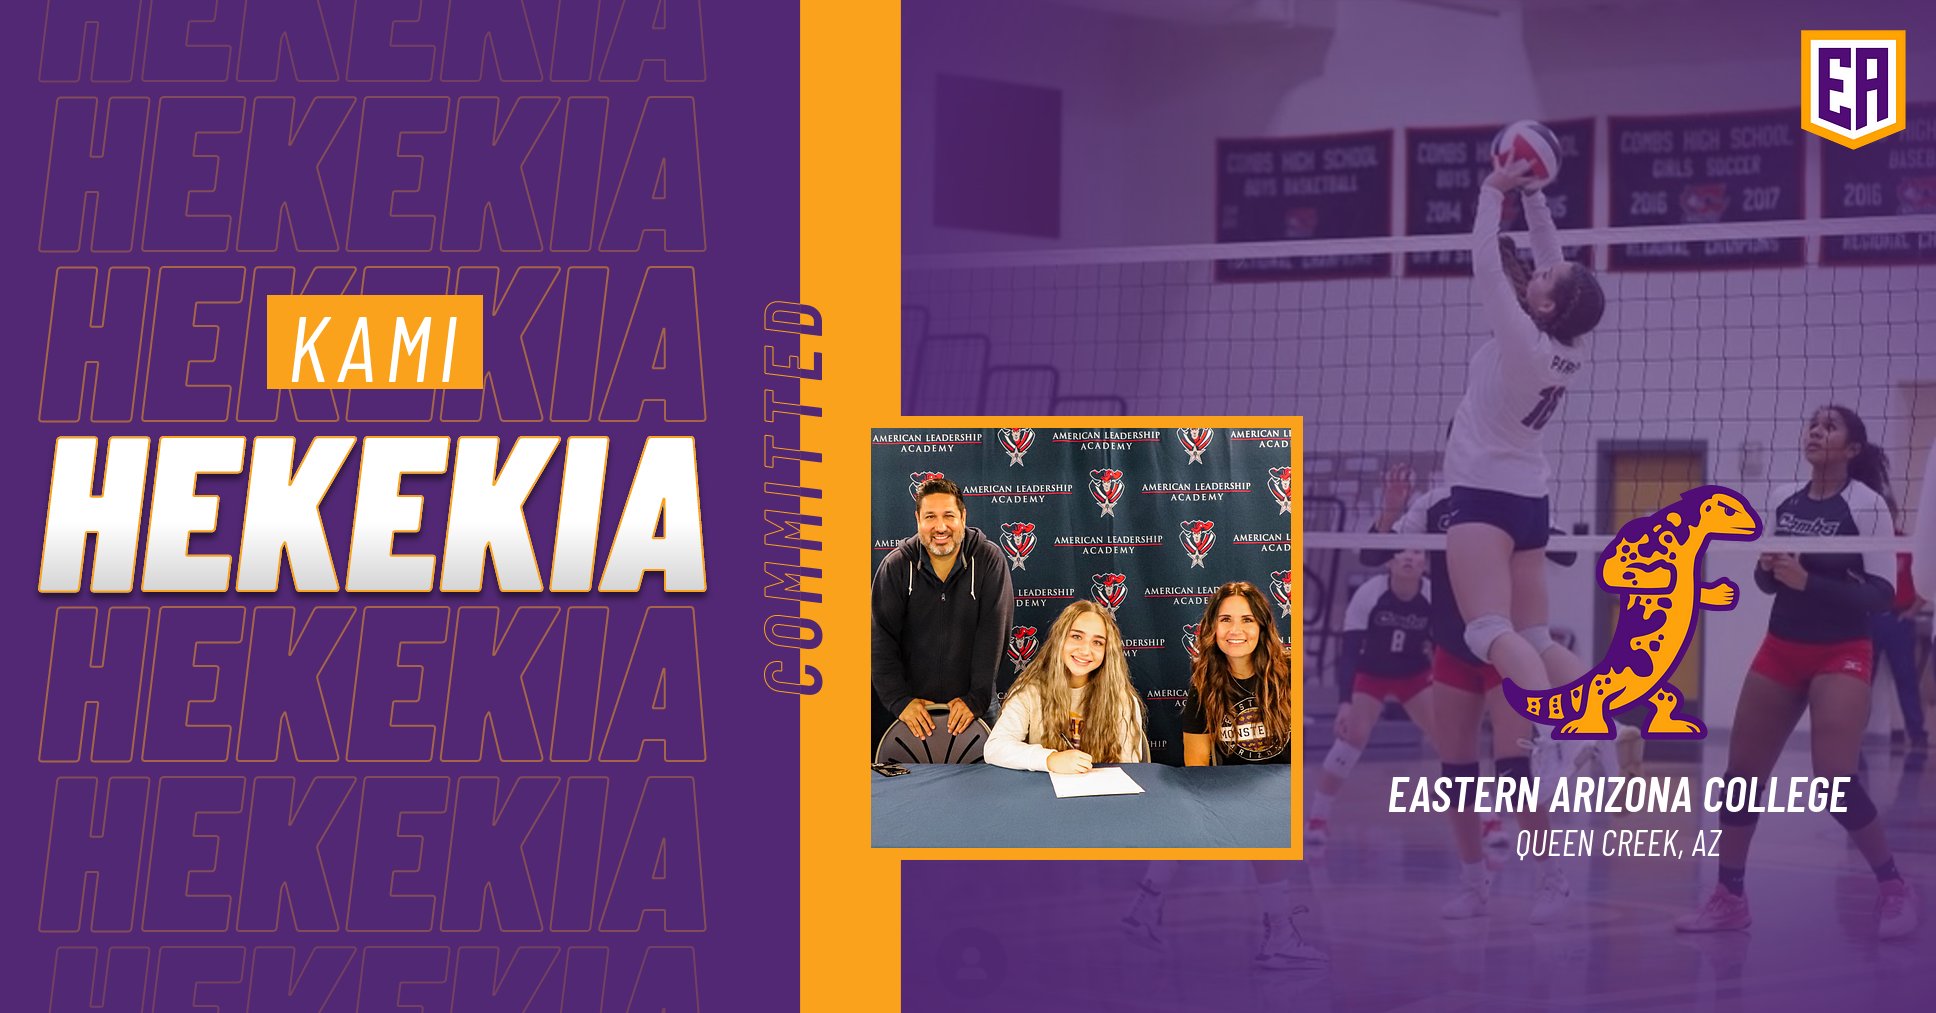 Kami Hekekia Signs with EAC